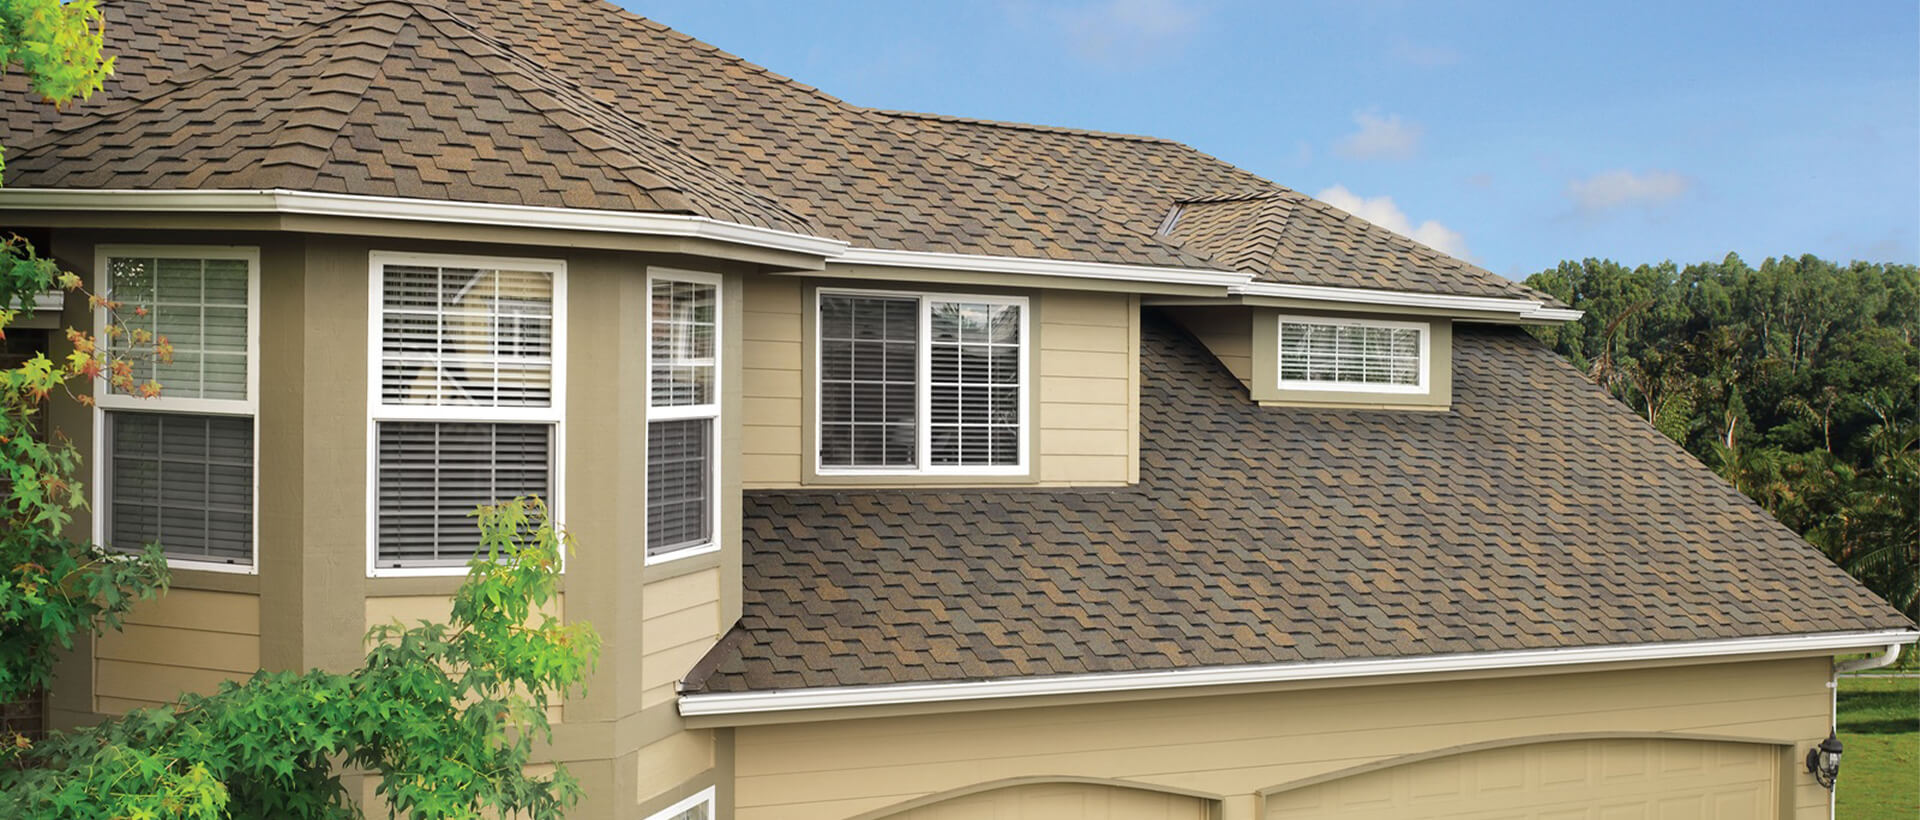 College Station Roofing Considerations